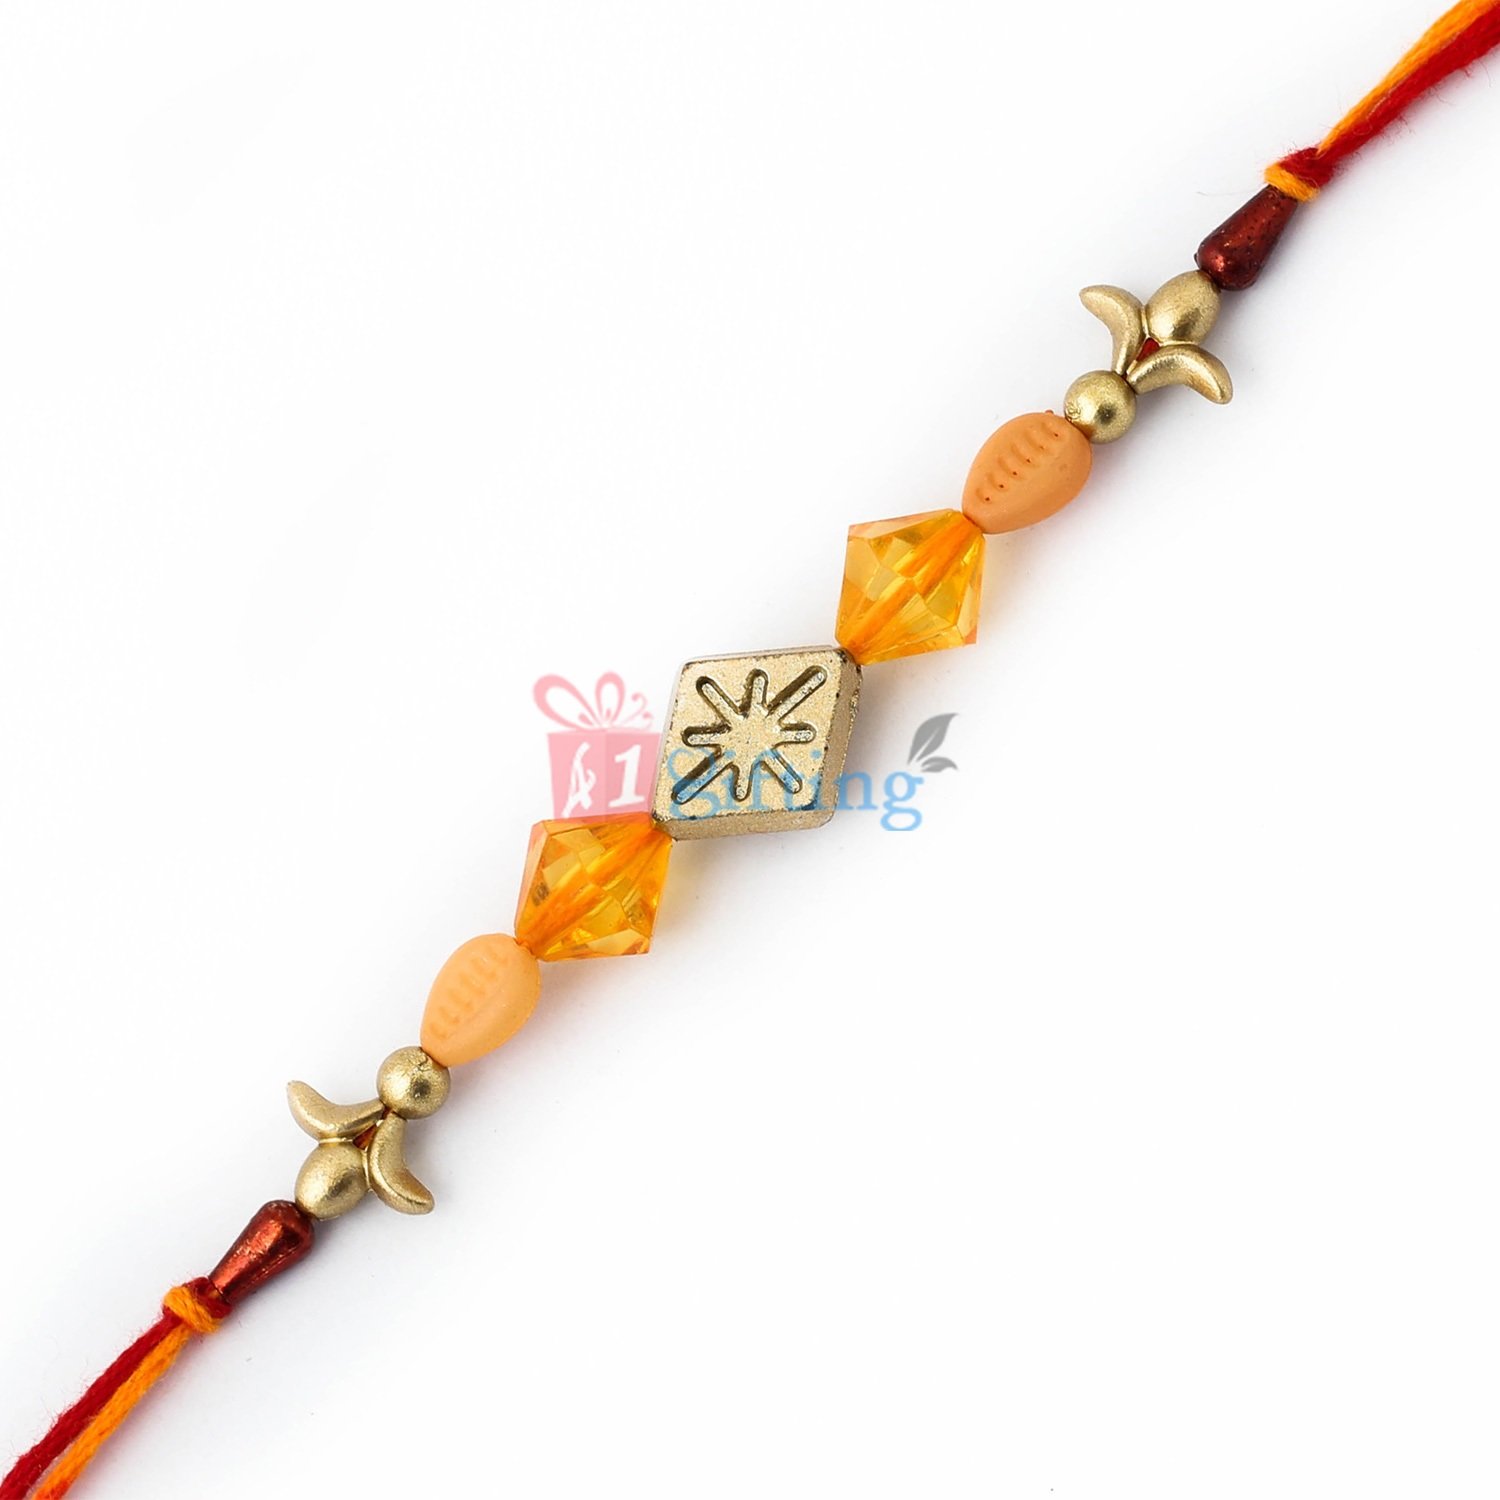 Designful crystal with various beads Rakhi for brother